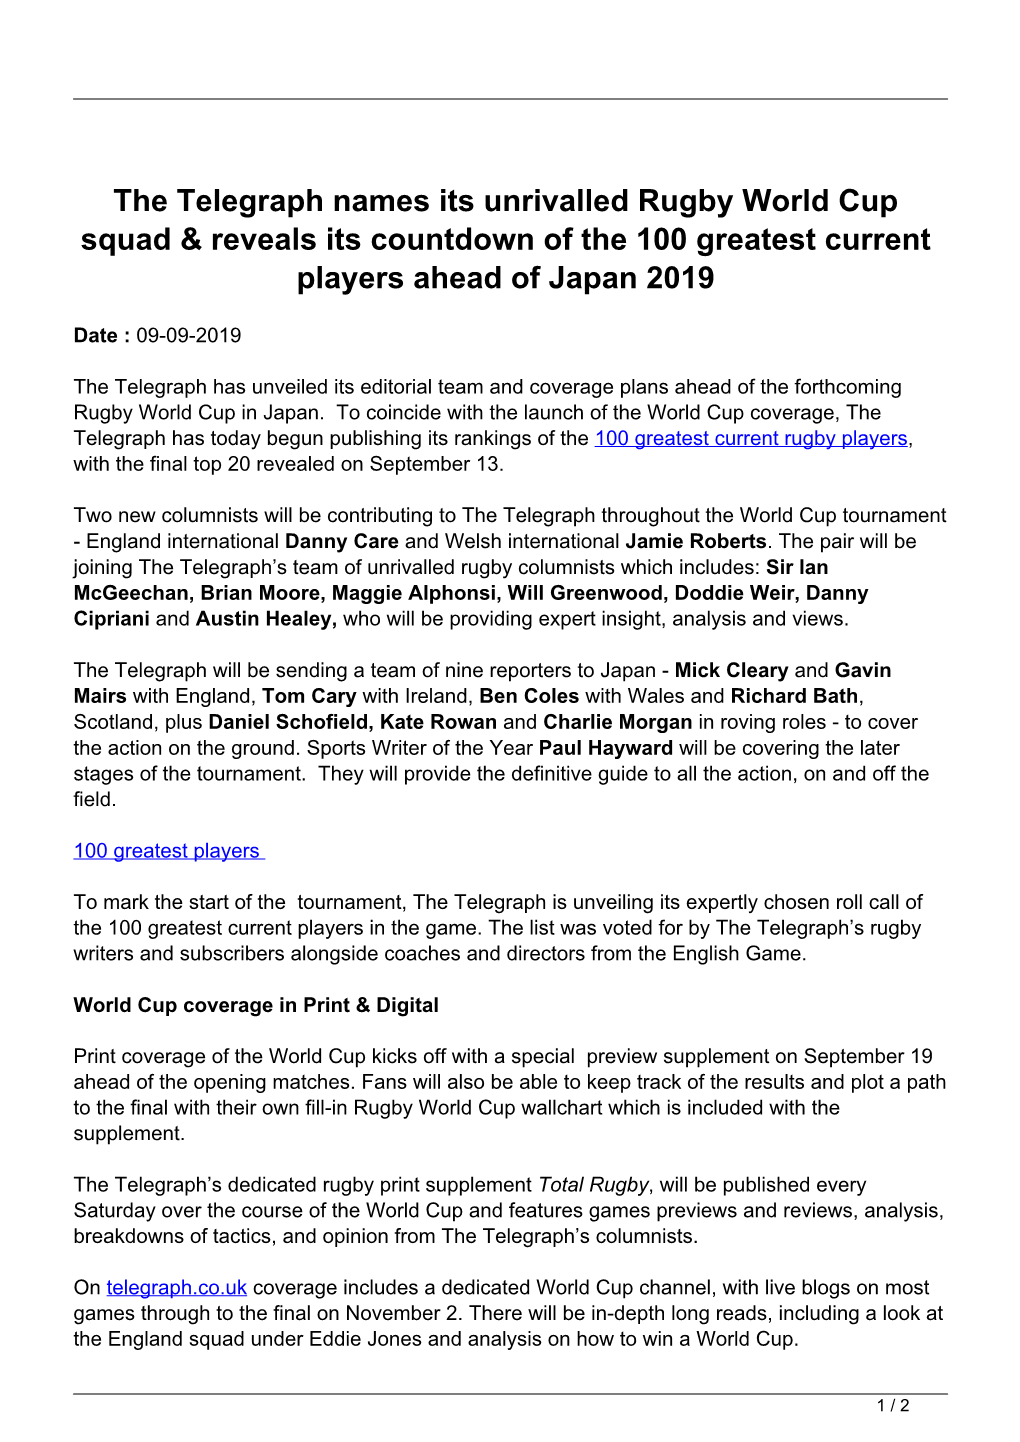 The Telegraph Names Its Unrivalled Rugby World Cup Squad & Reveals Its Countdown of the 100 Greatest Current Players Ahead of Japan 2019